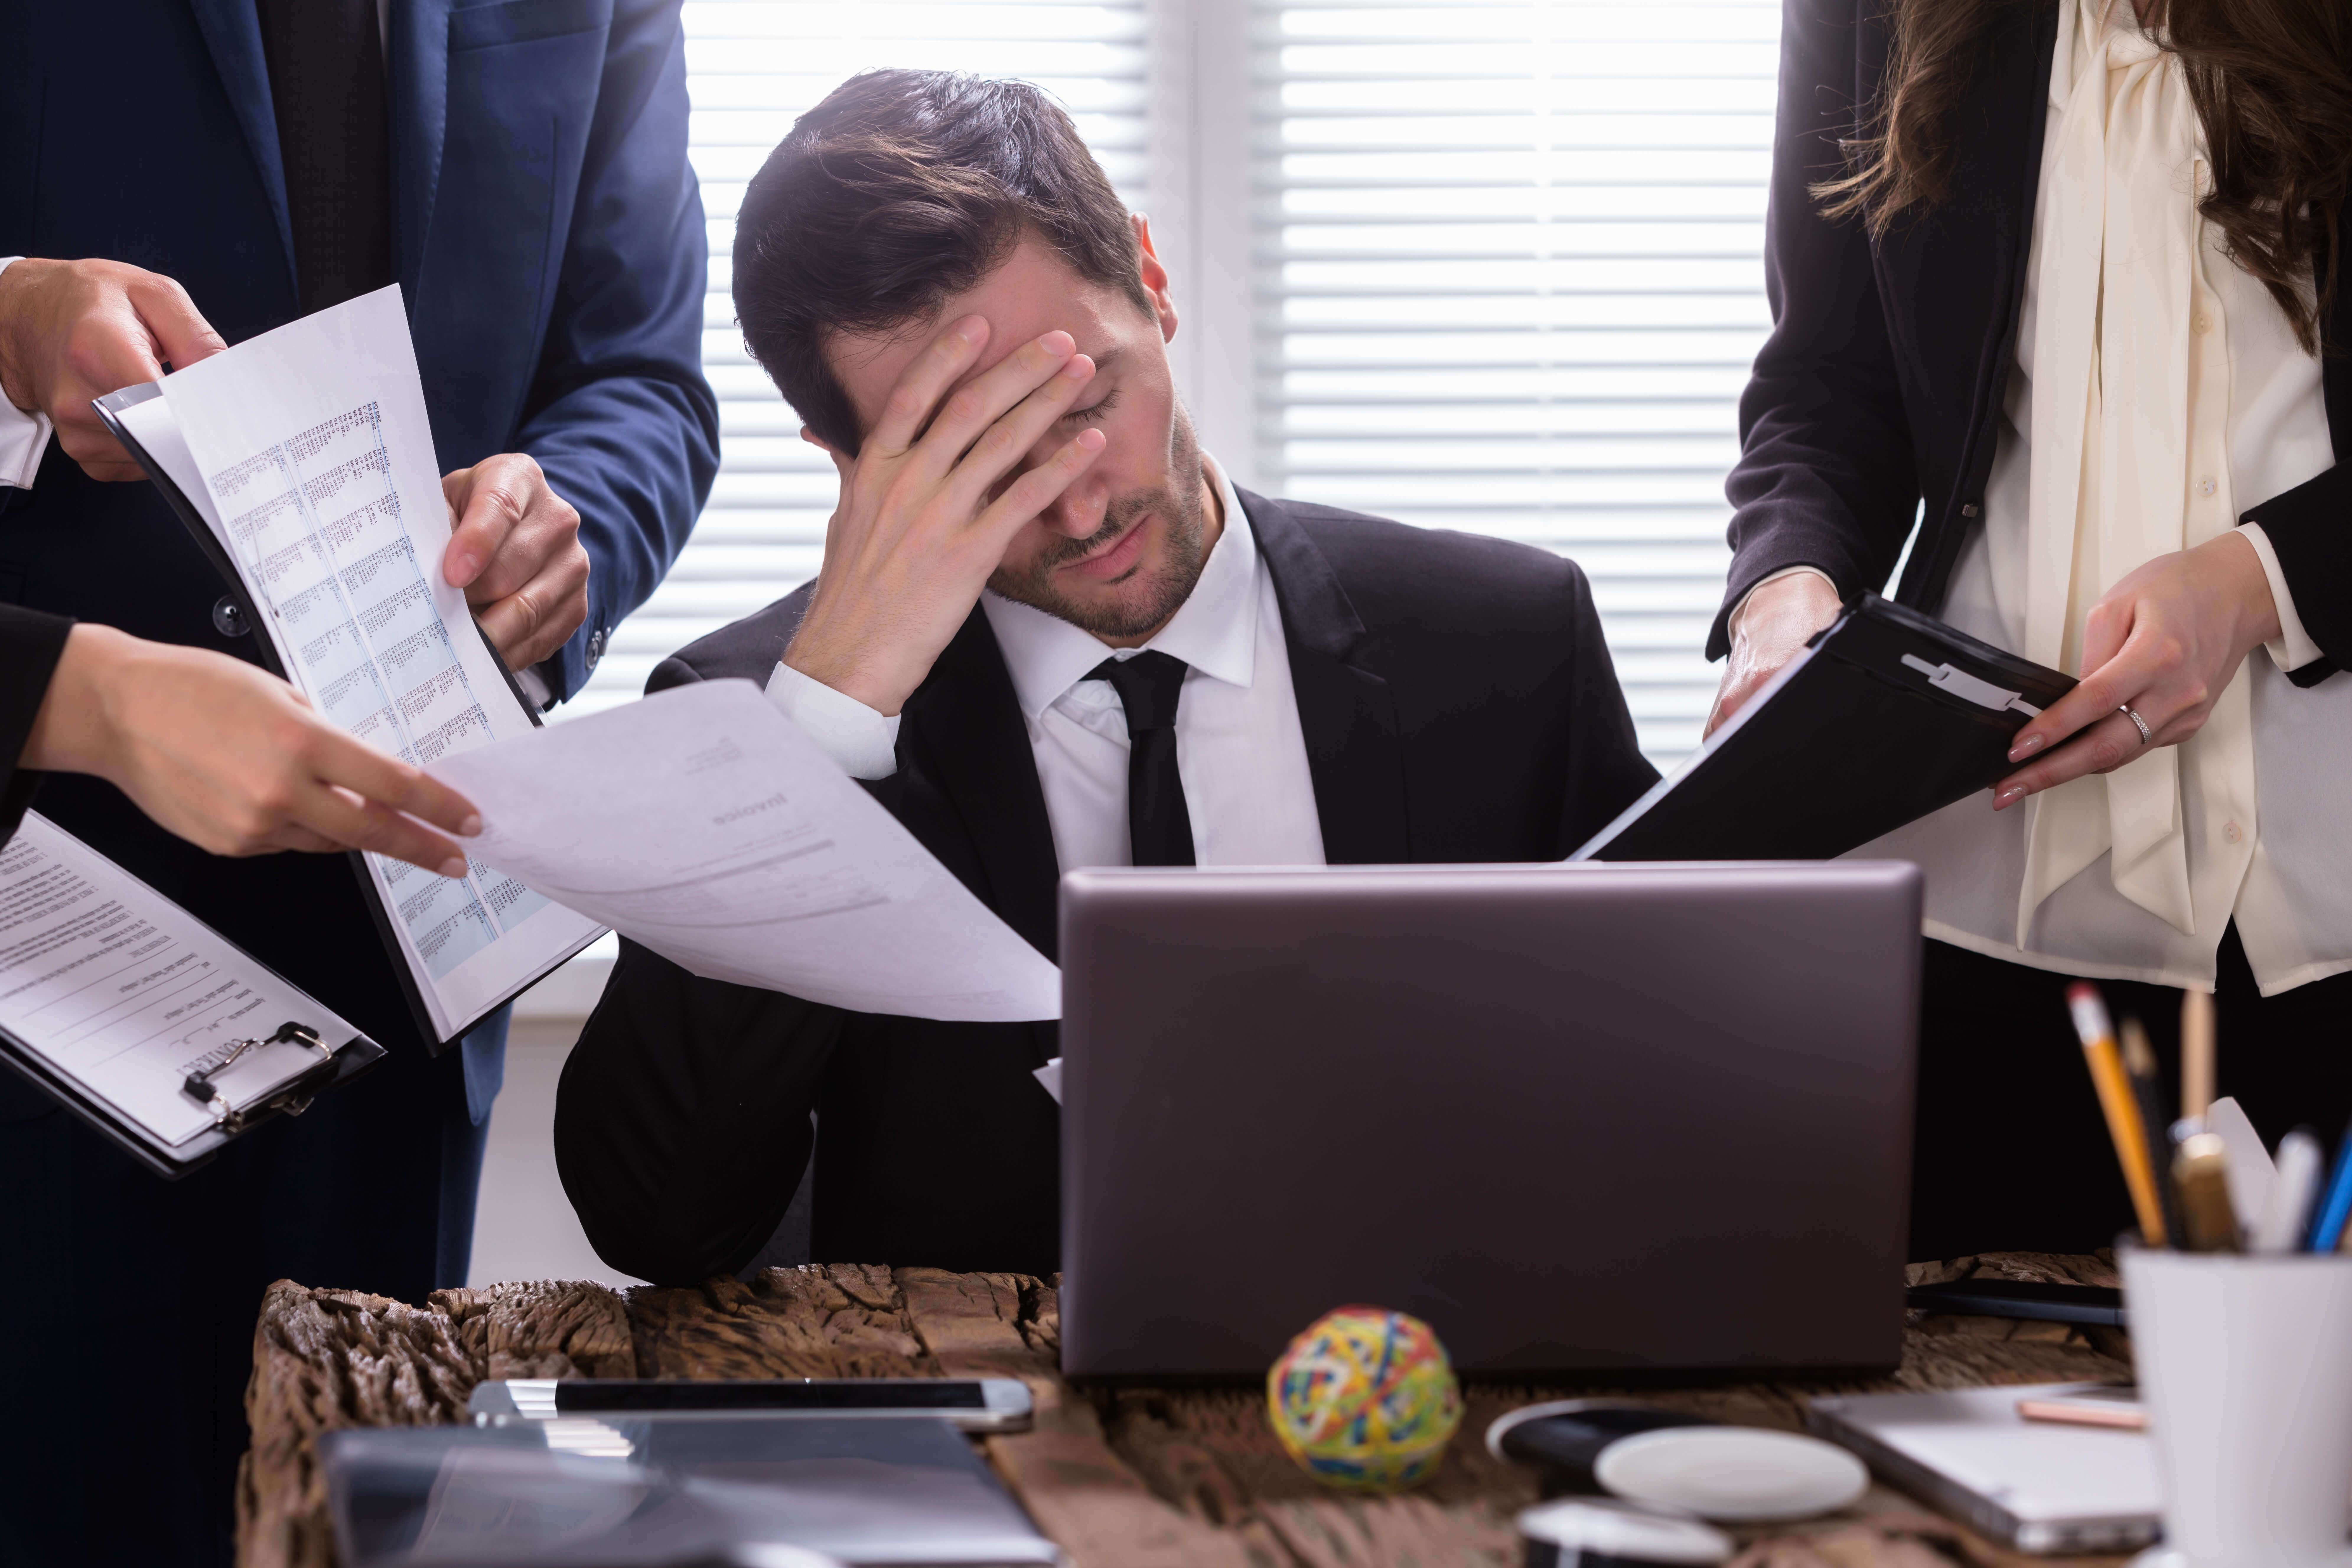 Stressed person surround by people with paperwork